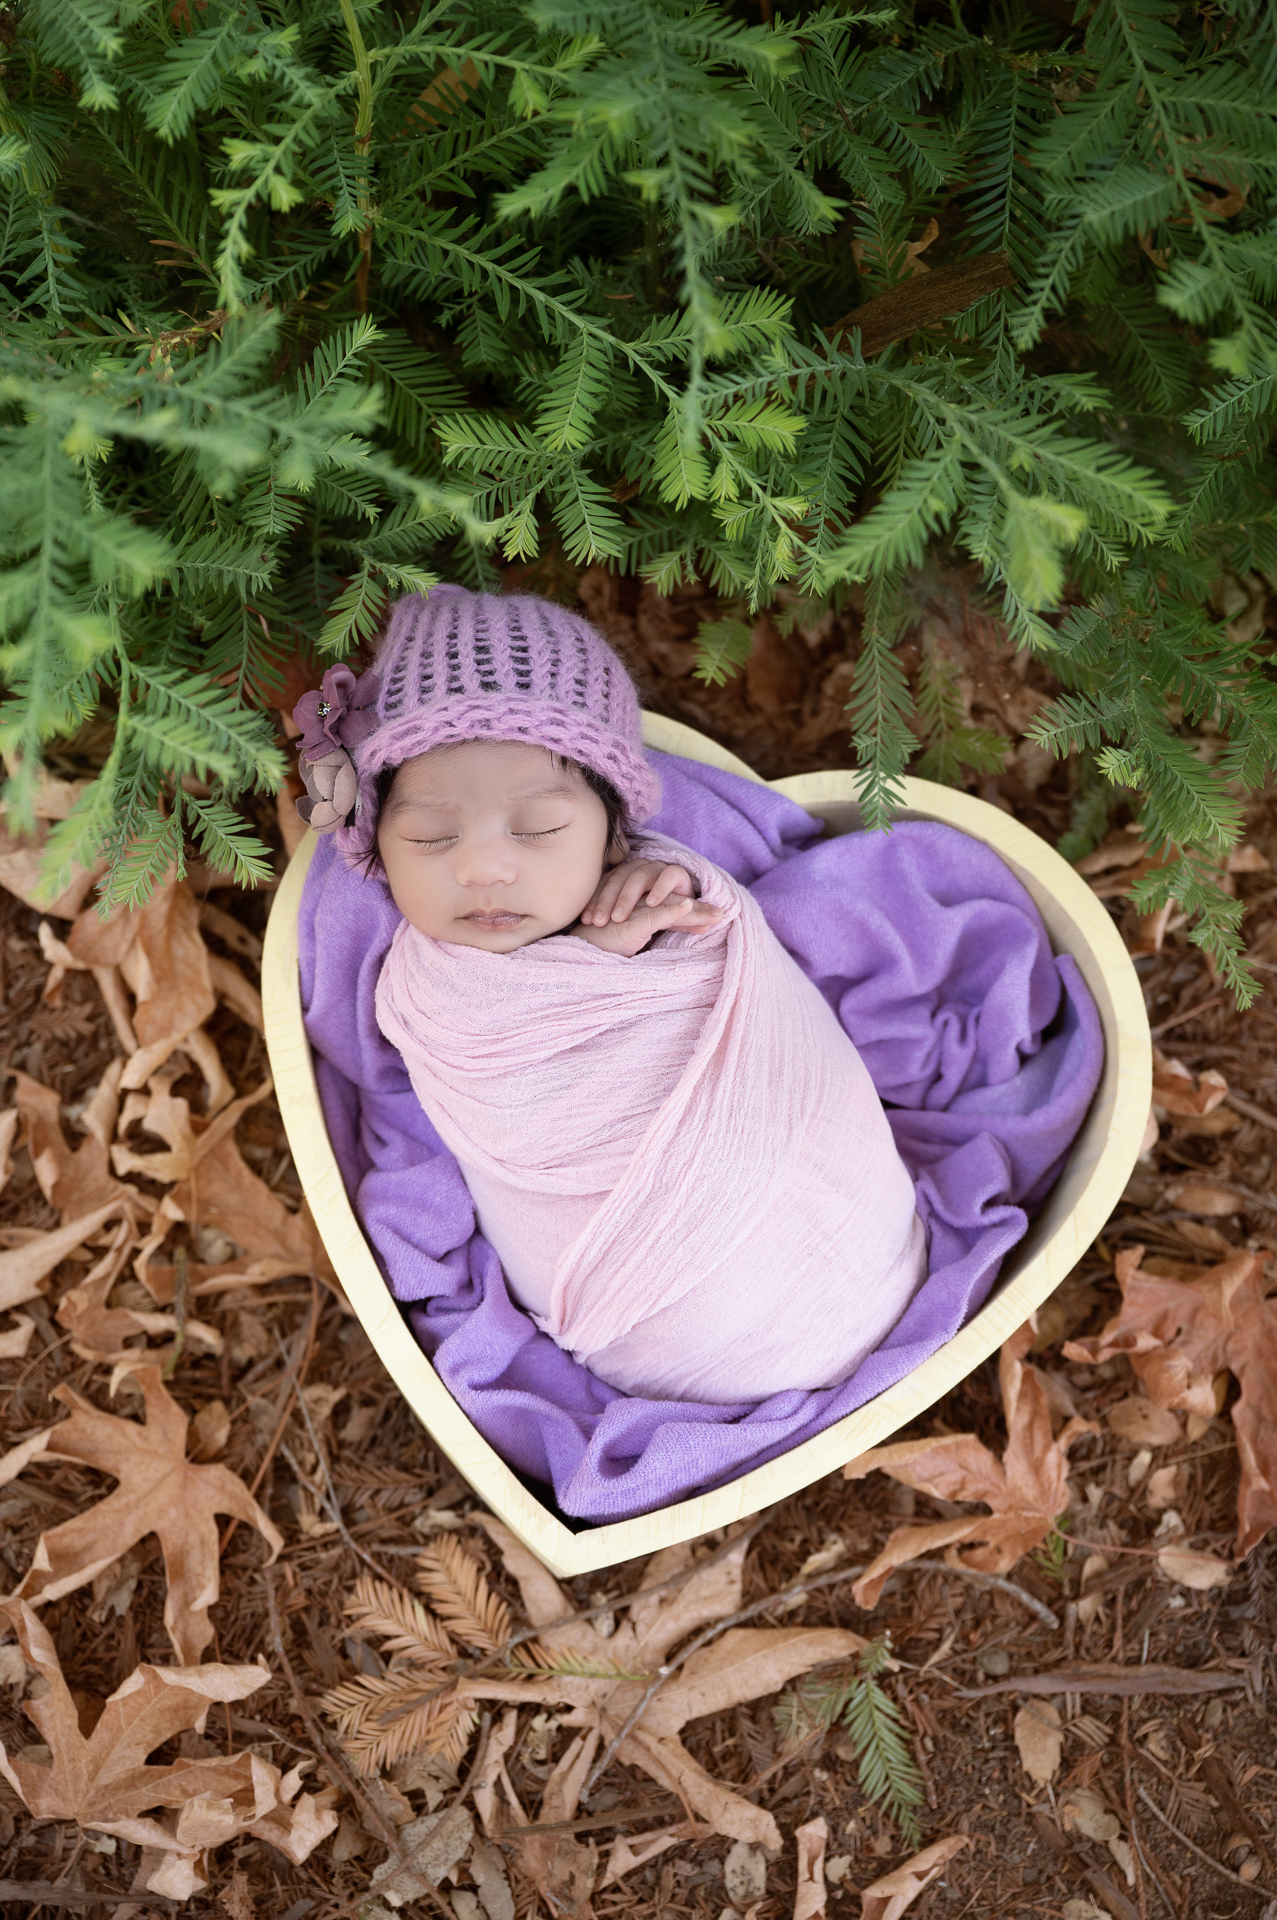 Newborn baby girl rests on heart shaped prop outdoors during fall season. Green pine and brown leaves decorate the scene.